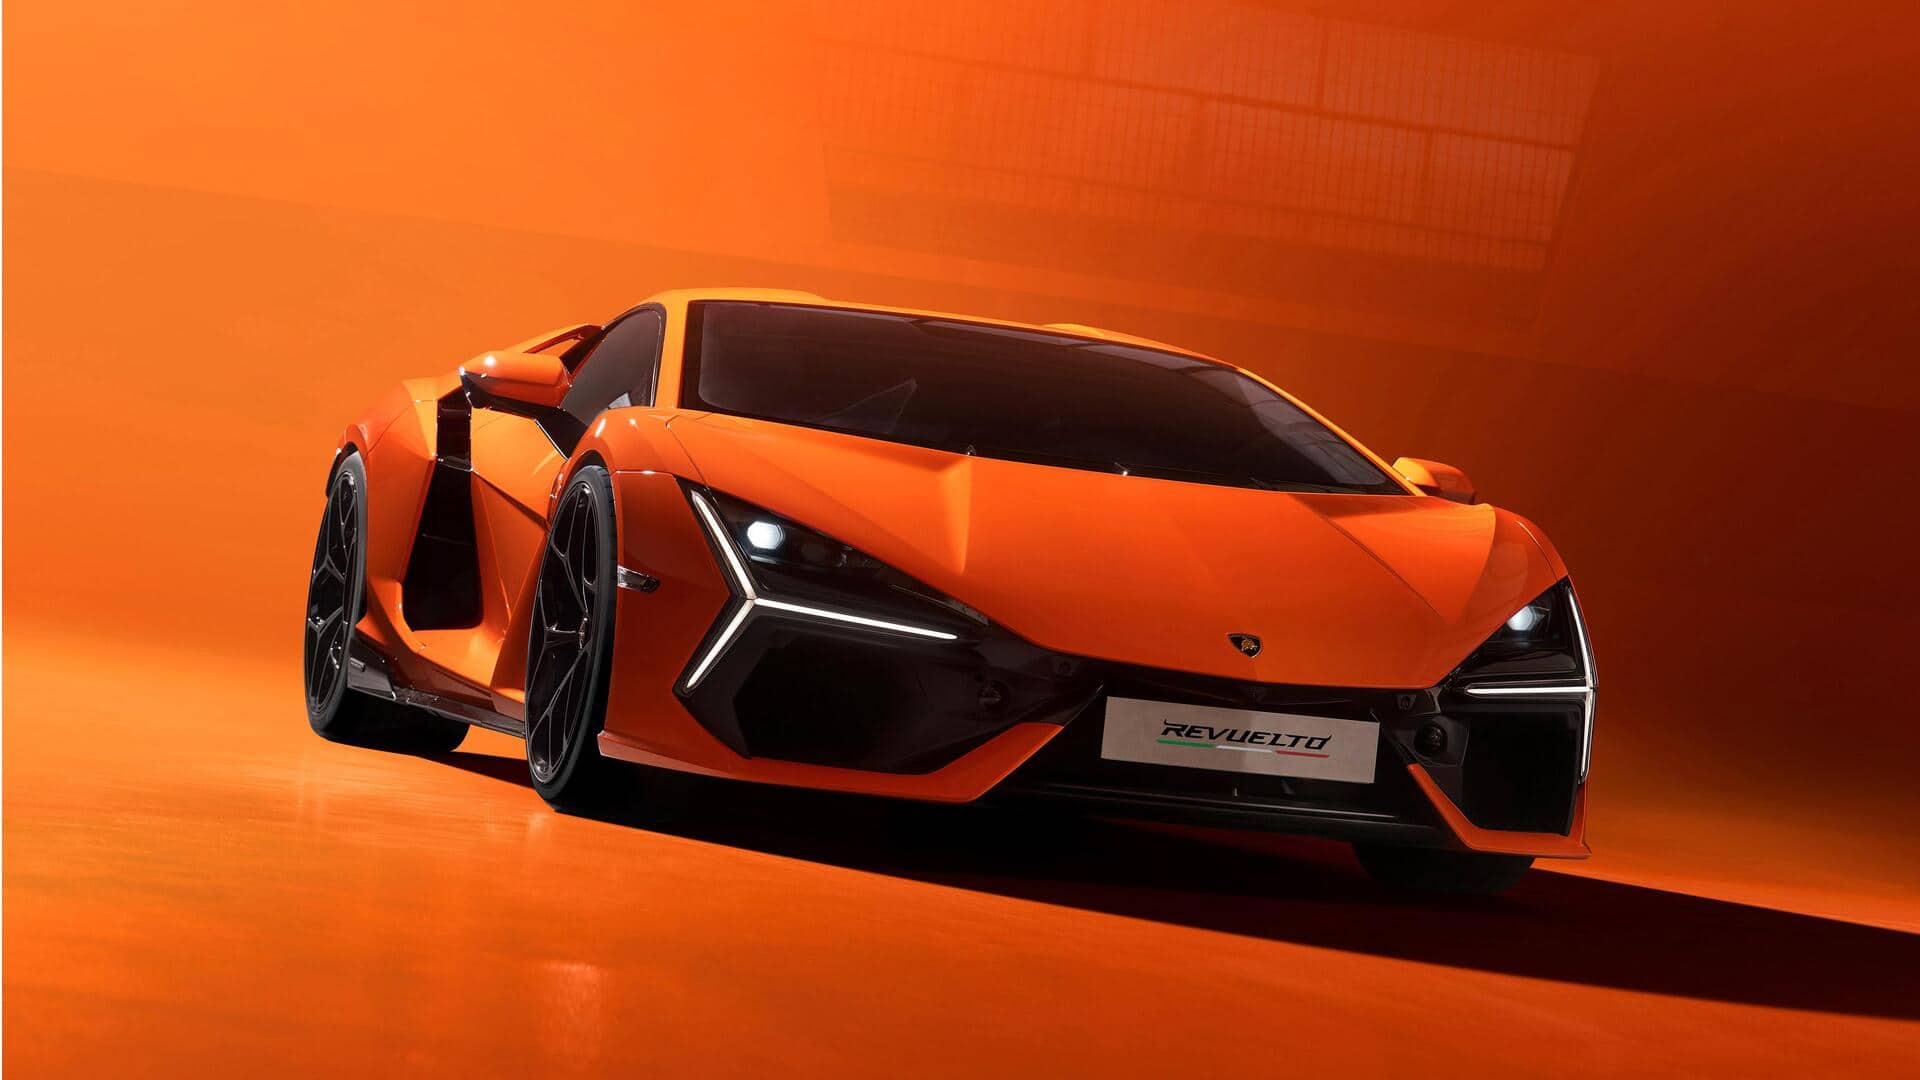 Lamborghini's most powerful supercar launched in India at Rs. 8.9cr